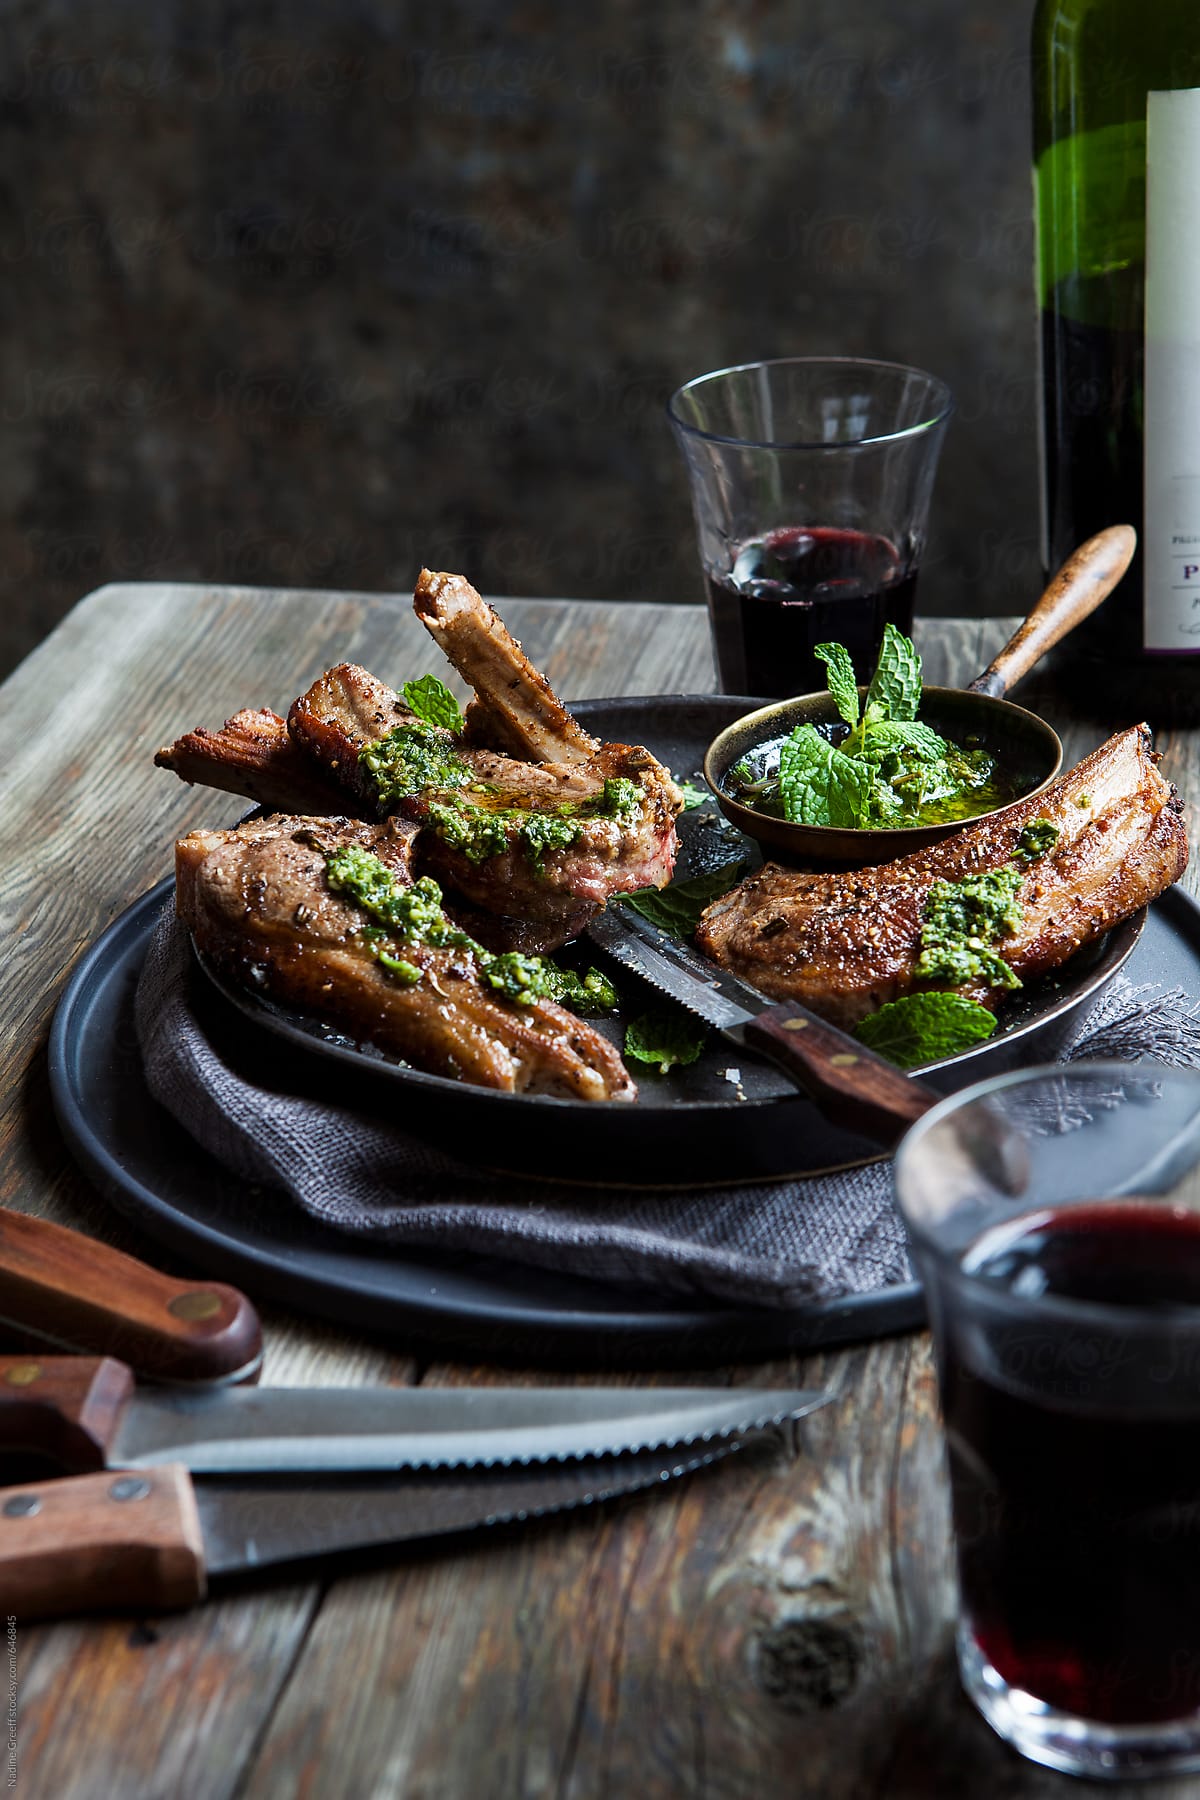 Meat lamb chops with chimichurri sauce and glasses of red wine